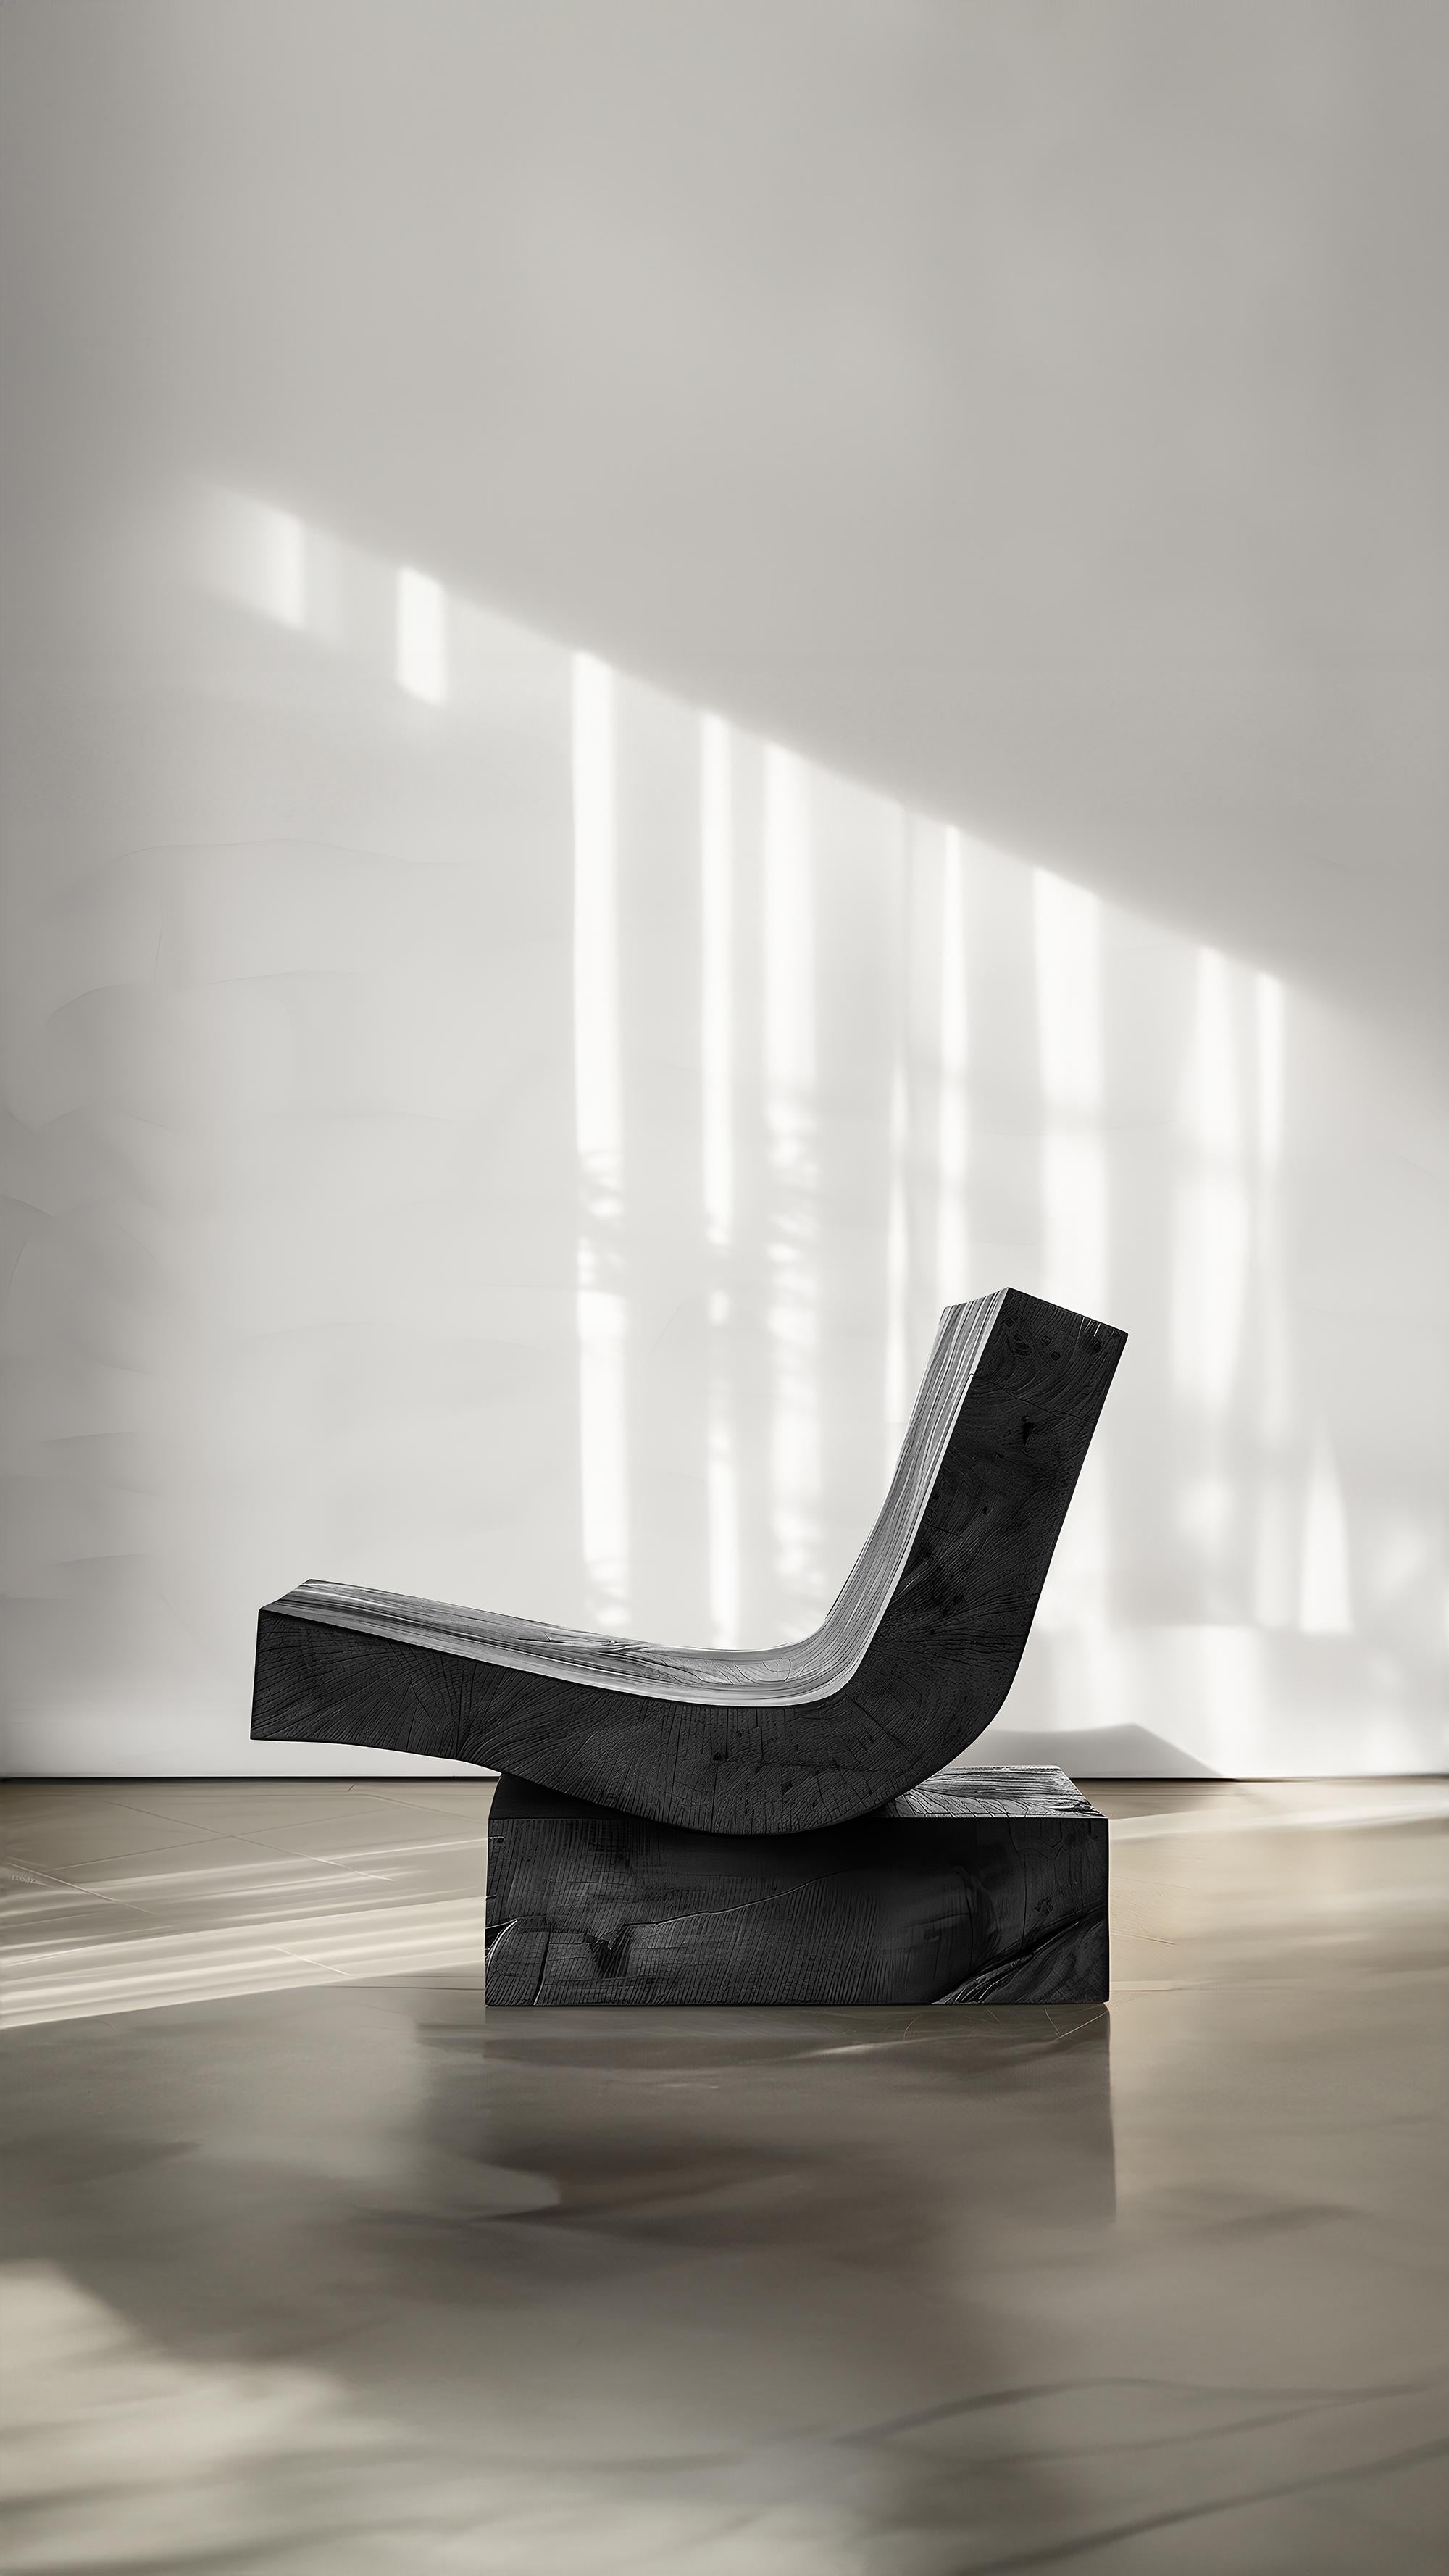 Mexicain Muted by NONO No10, chaise en chêne massif, luxe minimaliste en vente